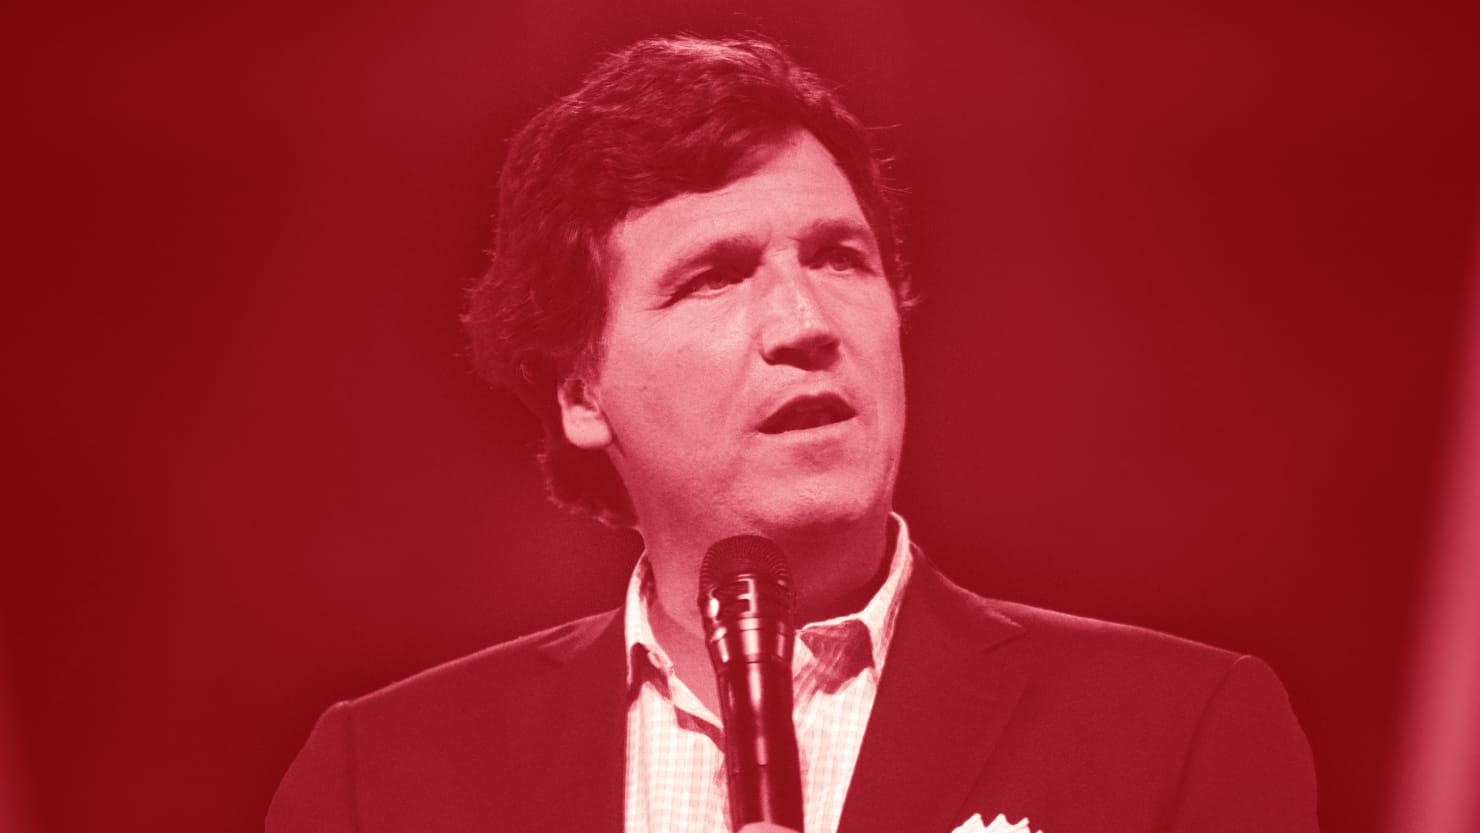 What’s next for Tucker Carlson after we’ve all seen his message?